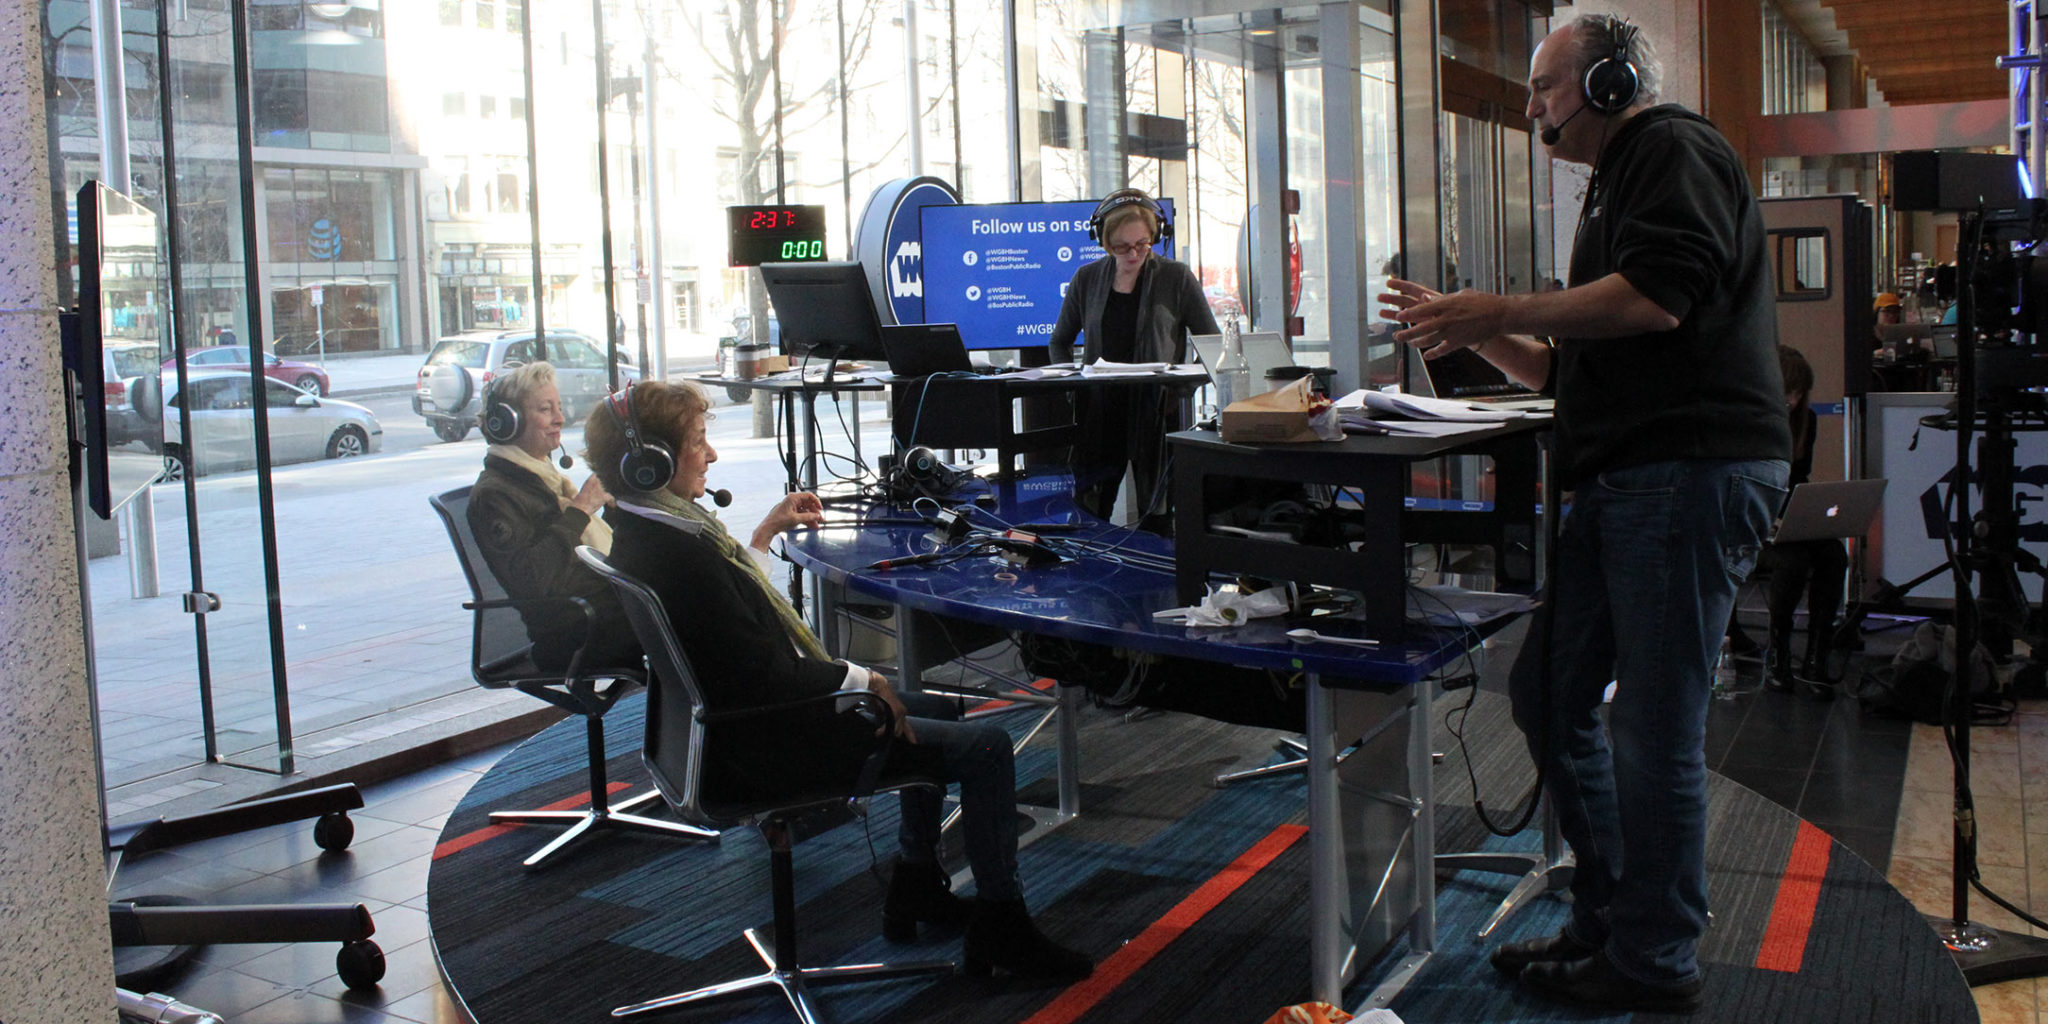 Jamie Bernstein and Nina Bernstein Simmons talk with Jim Braude and Margery Eagan on Boston Public Radio, recorded at the WGBH studio at the Boston Public Library, February 13, 2018. (Credit: Emily Balk/WGBH)